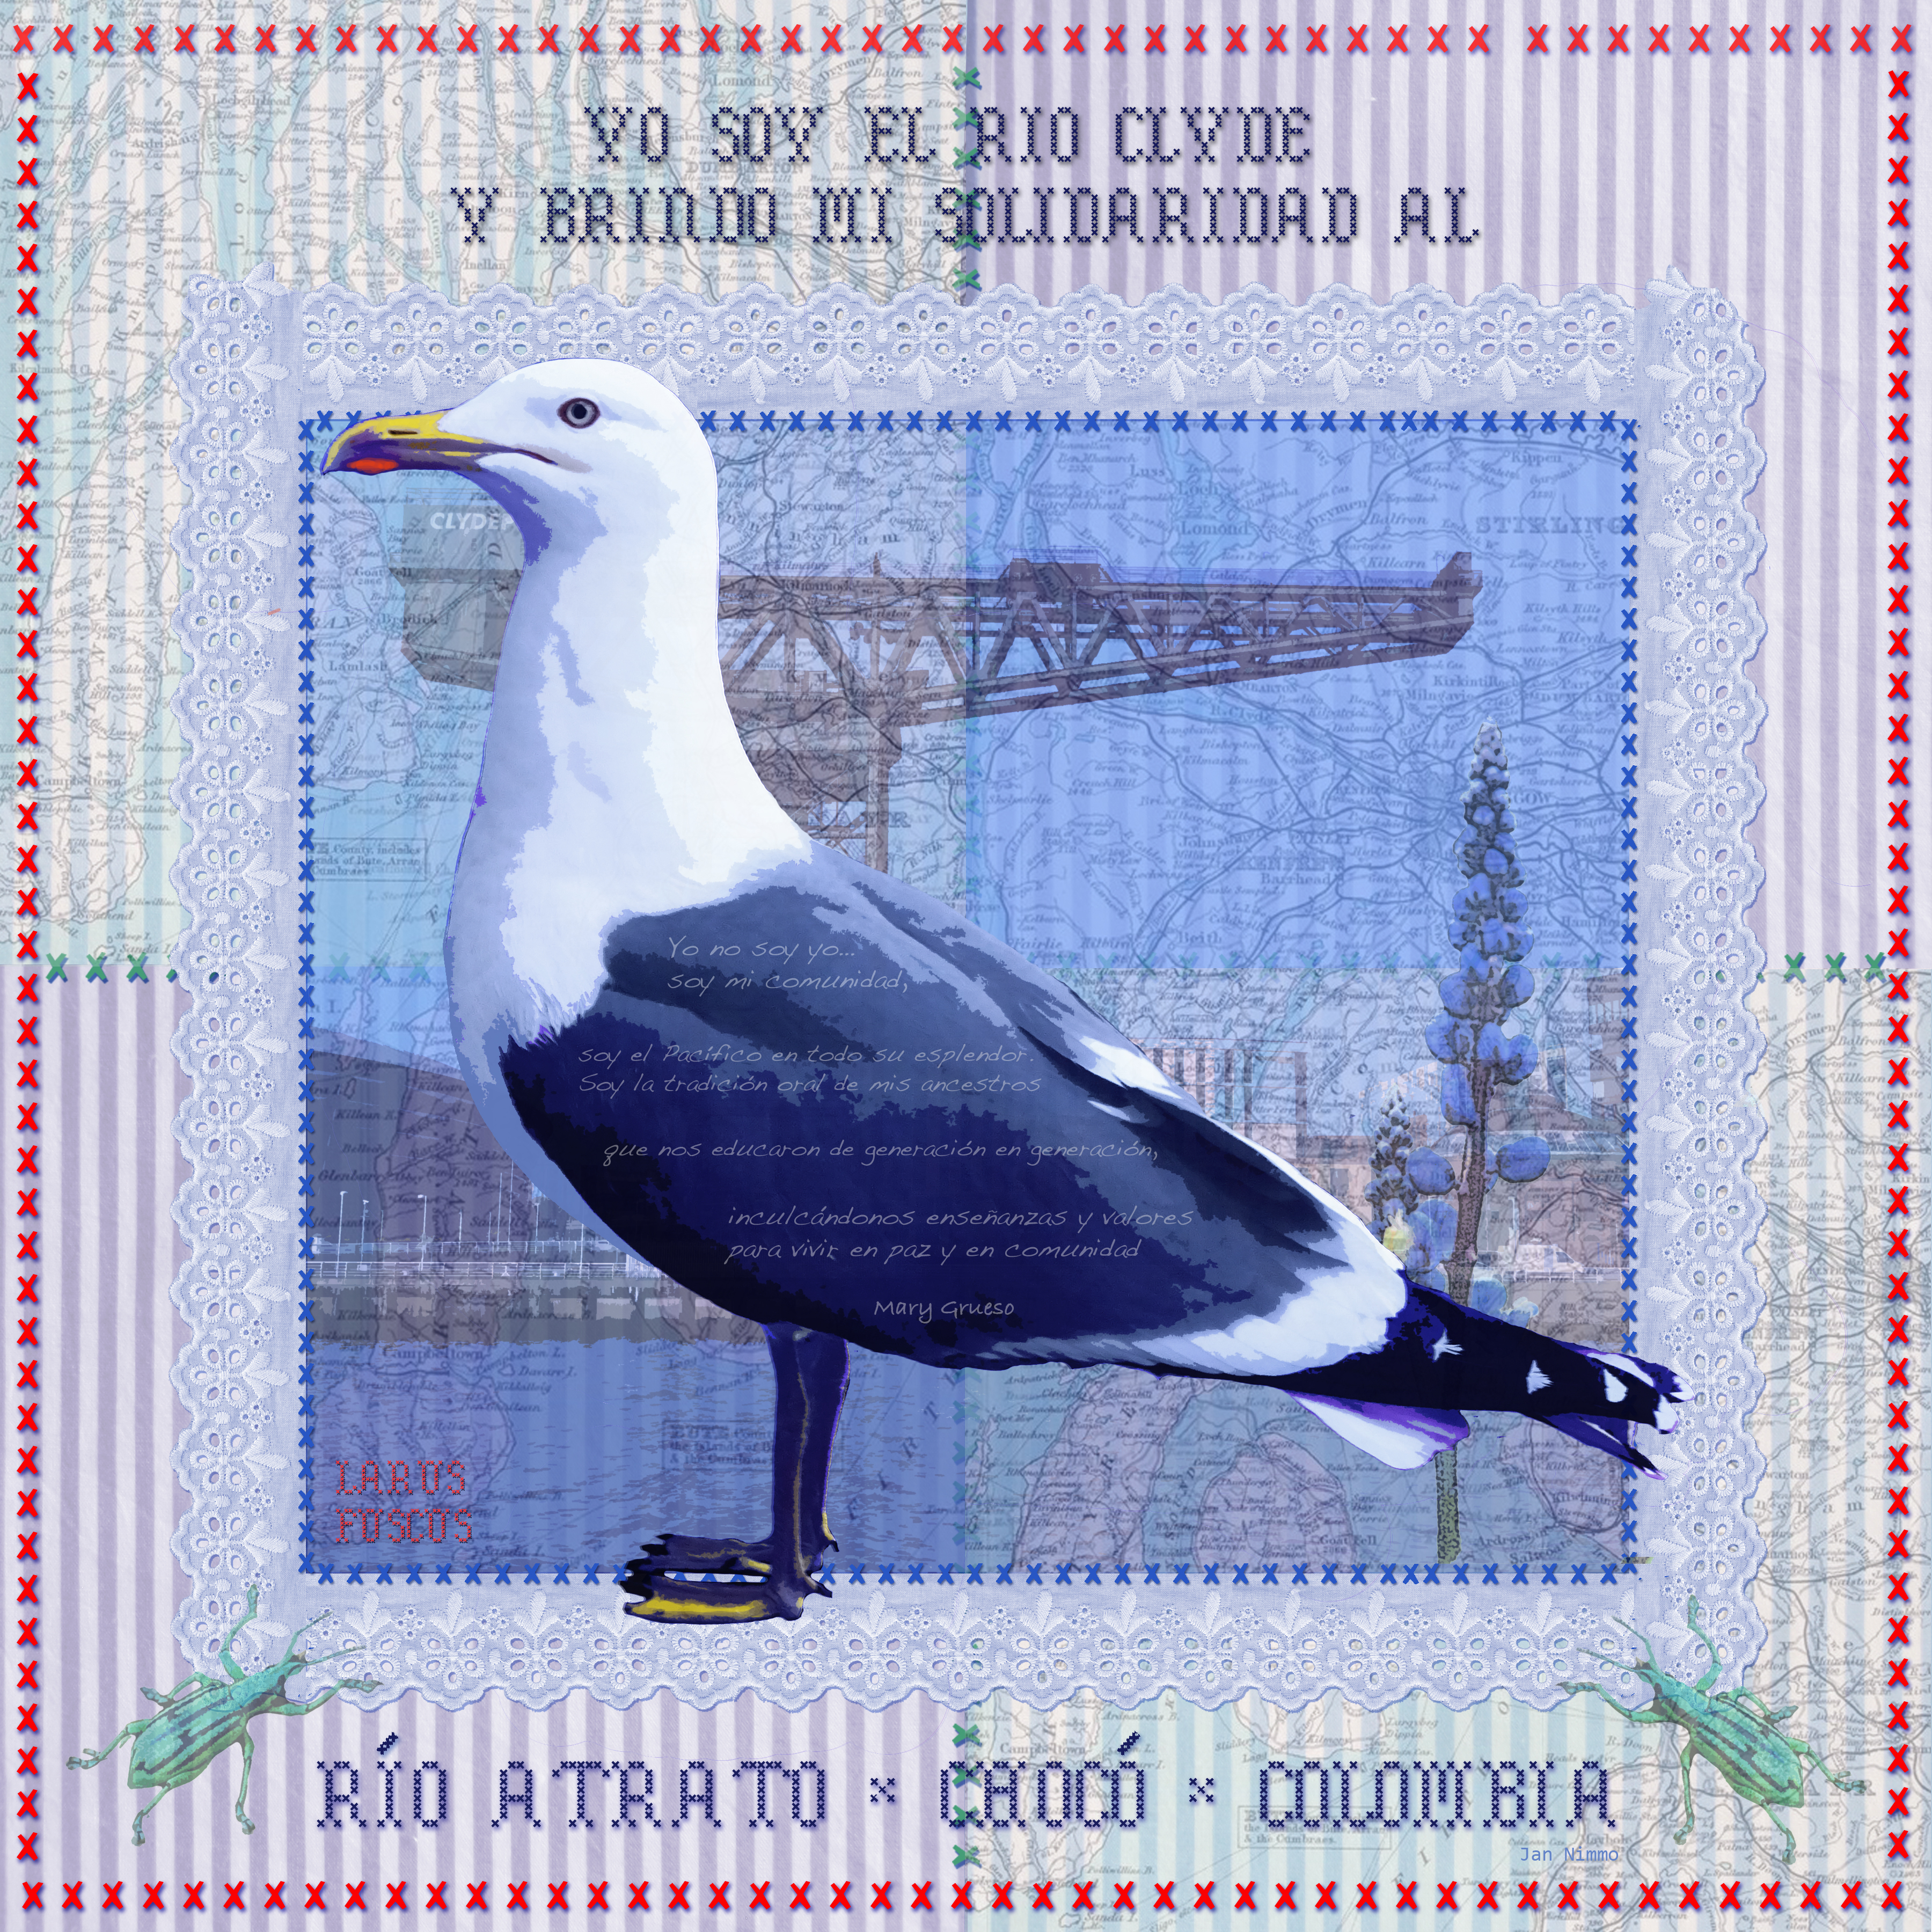 Artwork of a seagull at the Clyde river